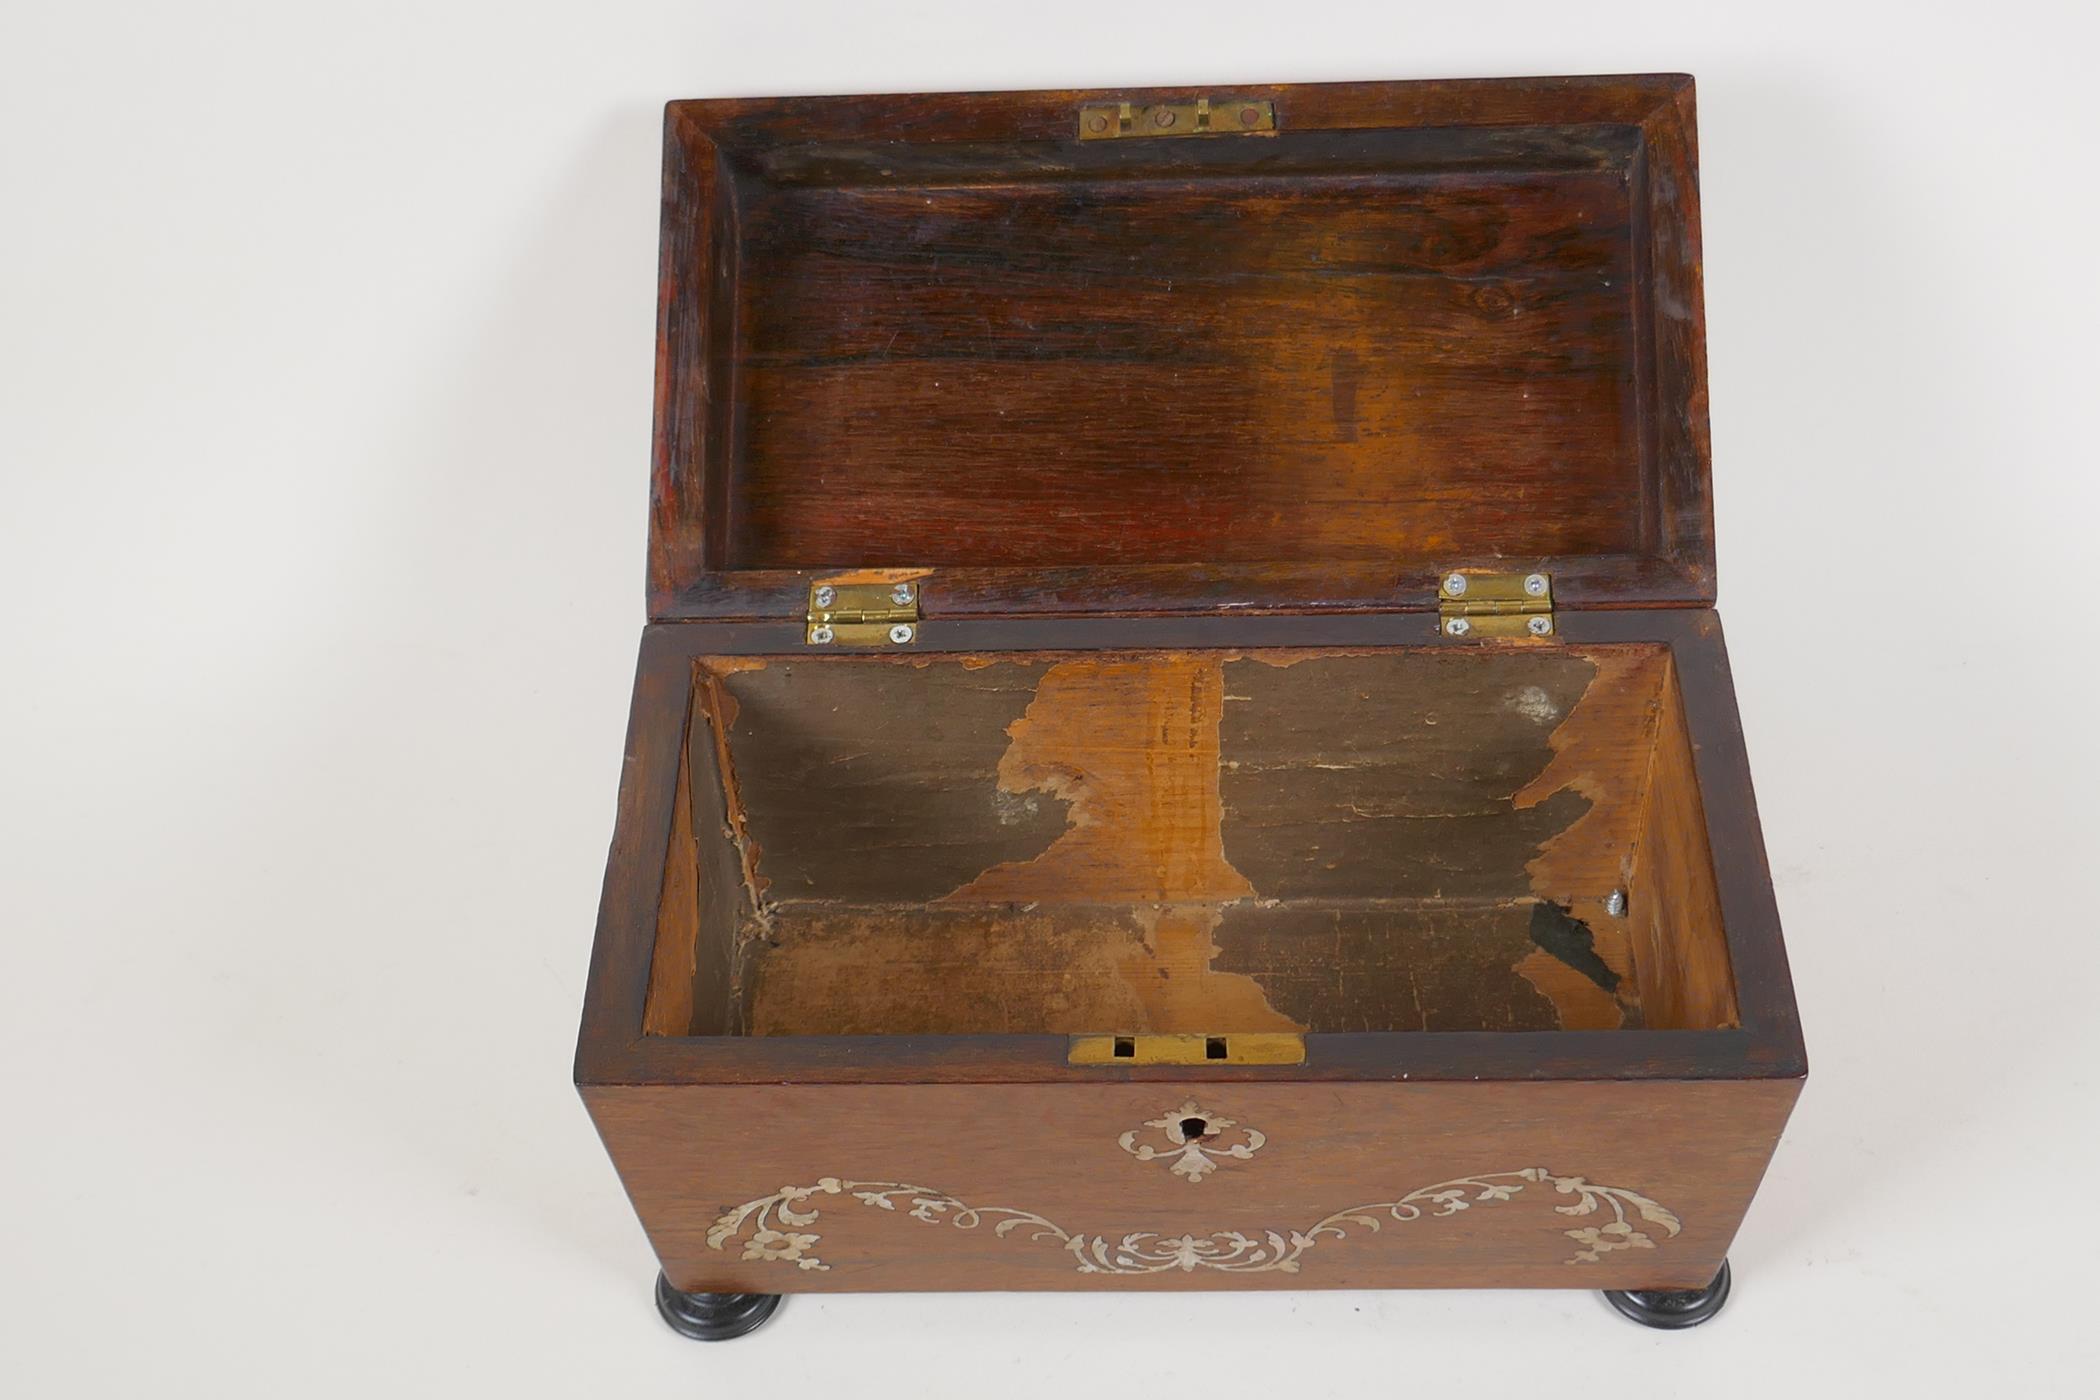 A C19th mother of pearl inlaid rosewood sarcophagus shaped tea caddy, no interior, 10" x 5½" x 6" - Image 6 of 6